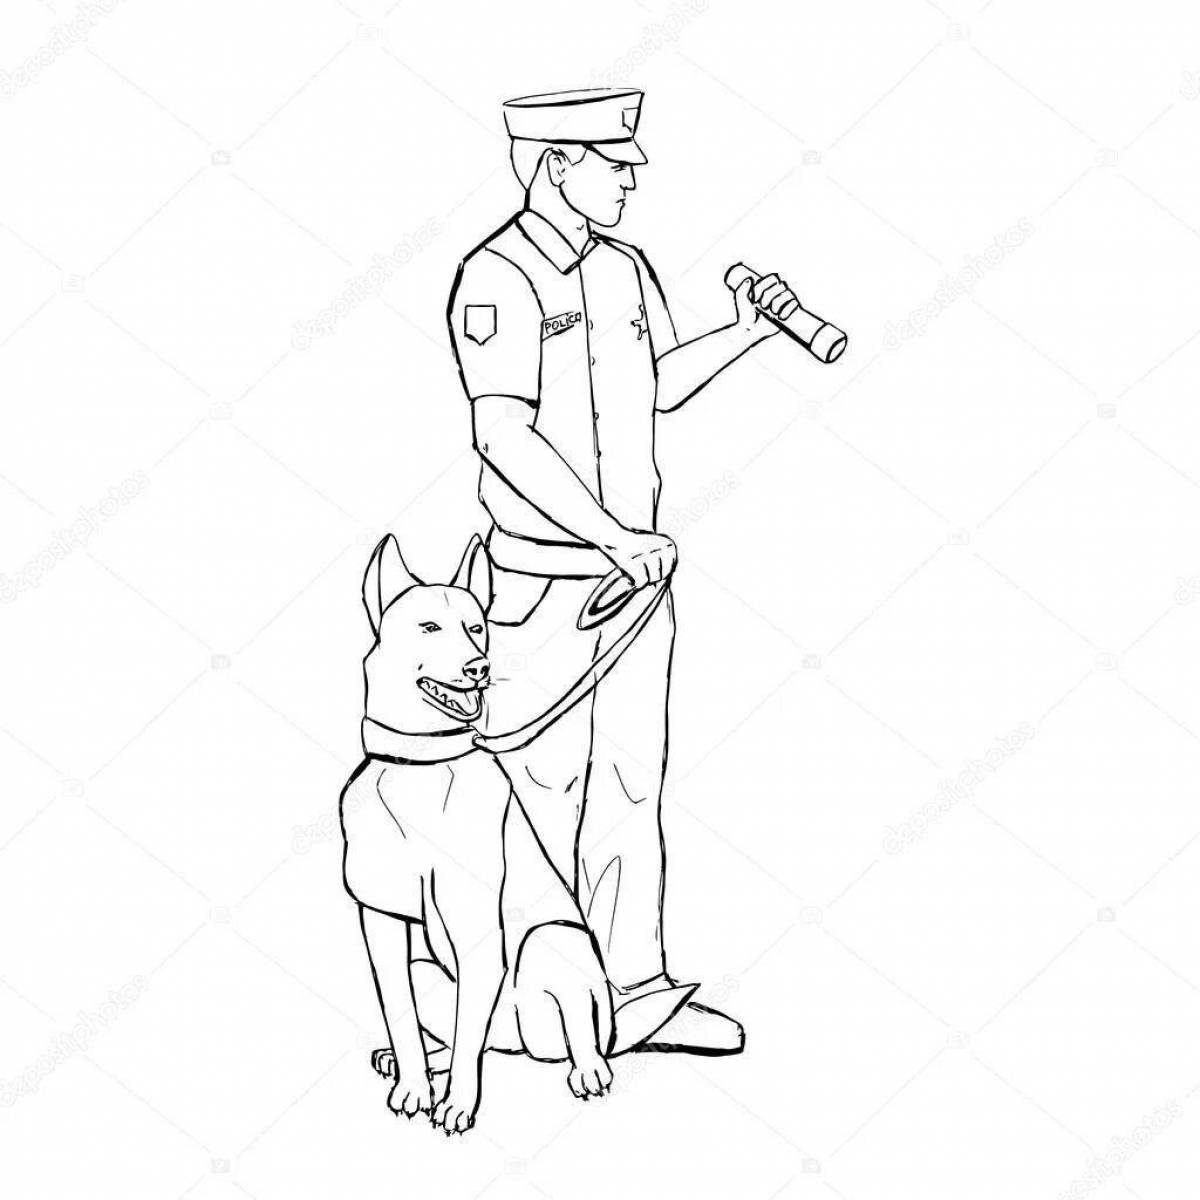 Dynamic border guard with a dog for children